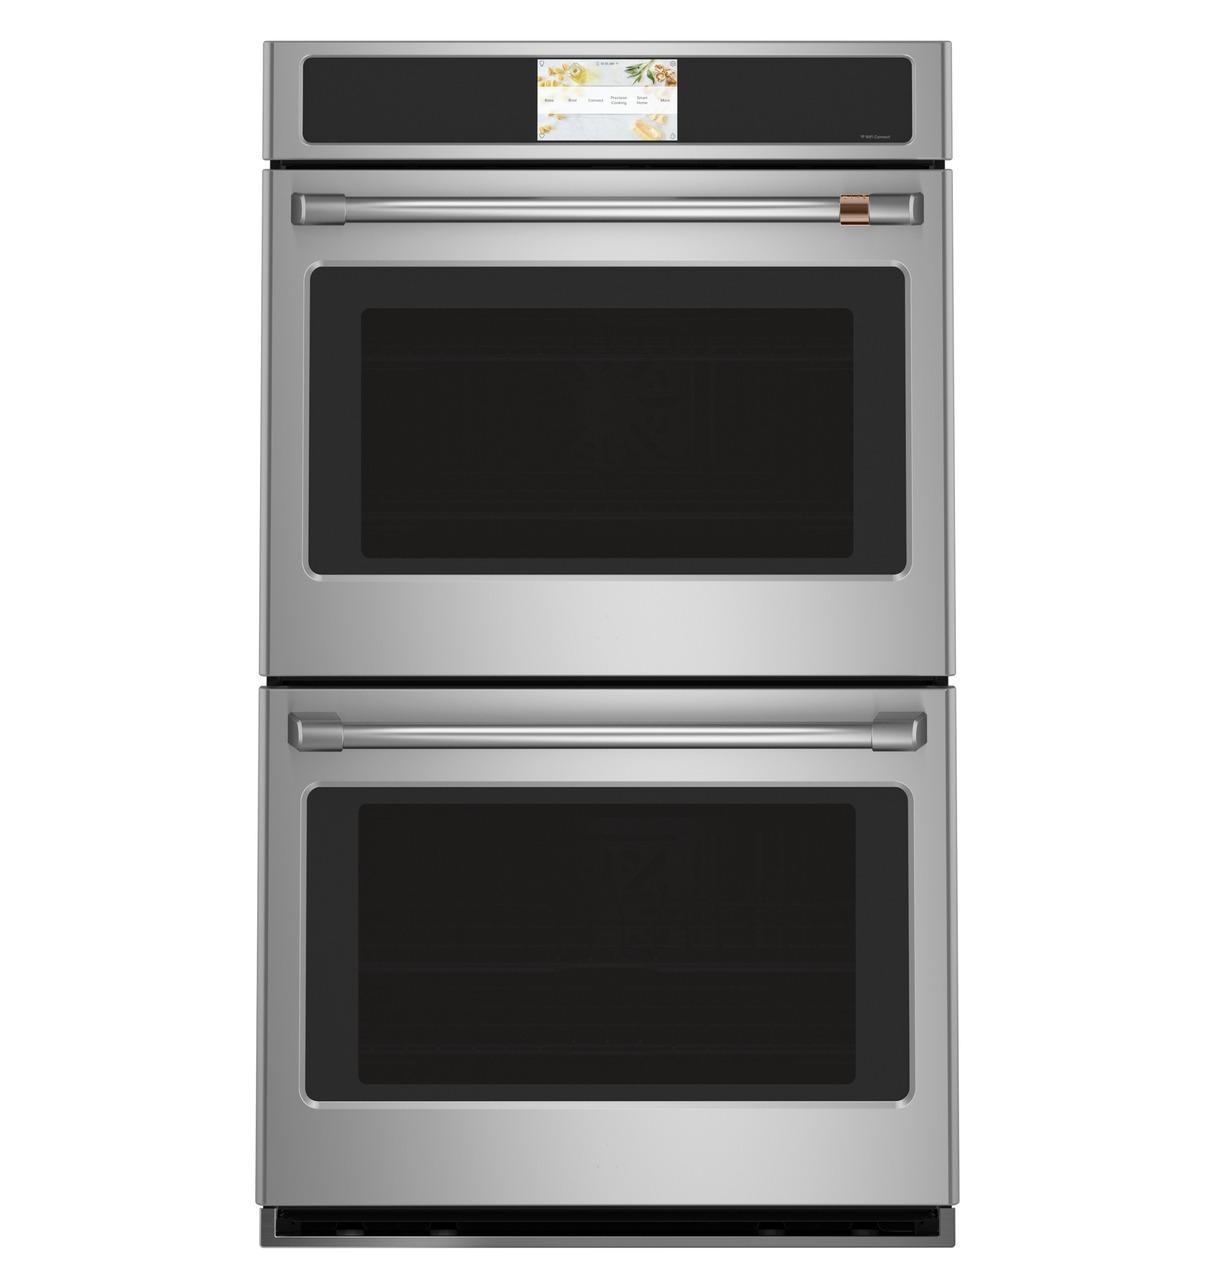 Cafe Caf(eback)™ Professional Series 30" Smart Built-In Convection Double Wall Oven